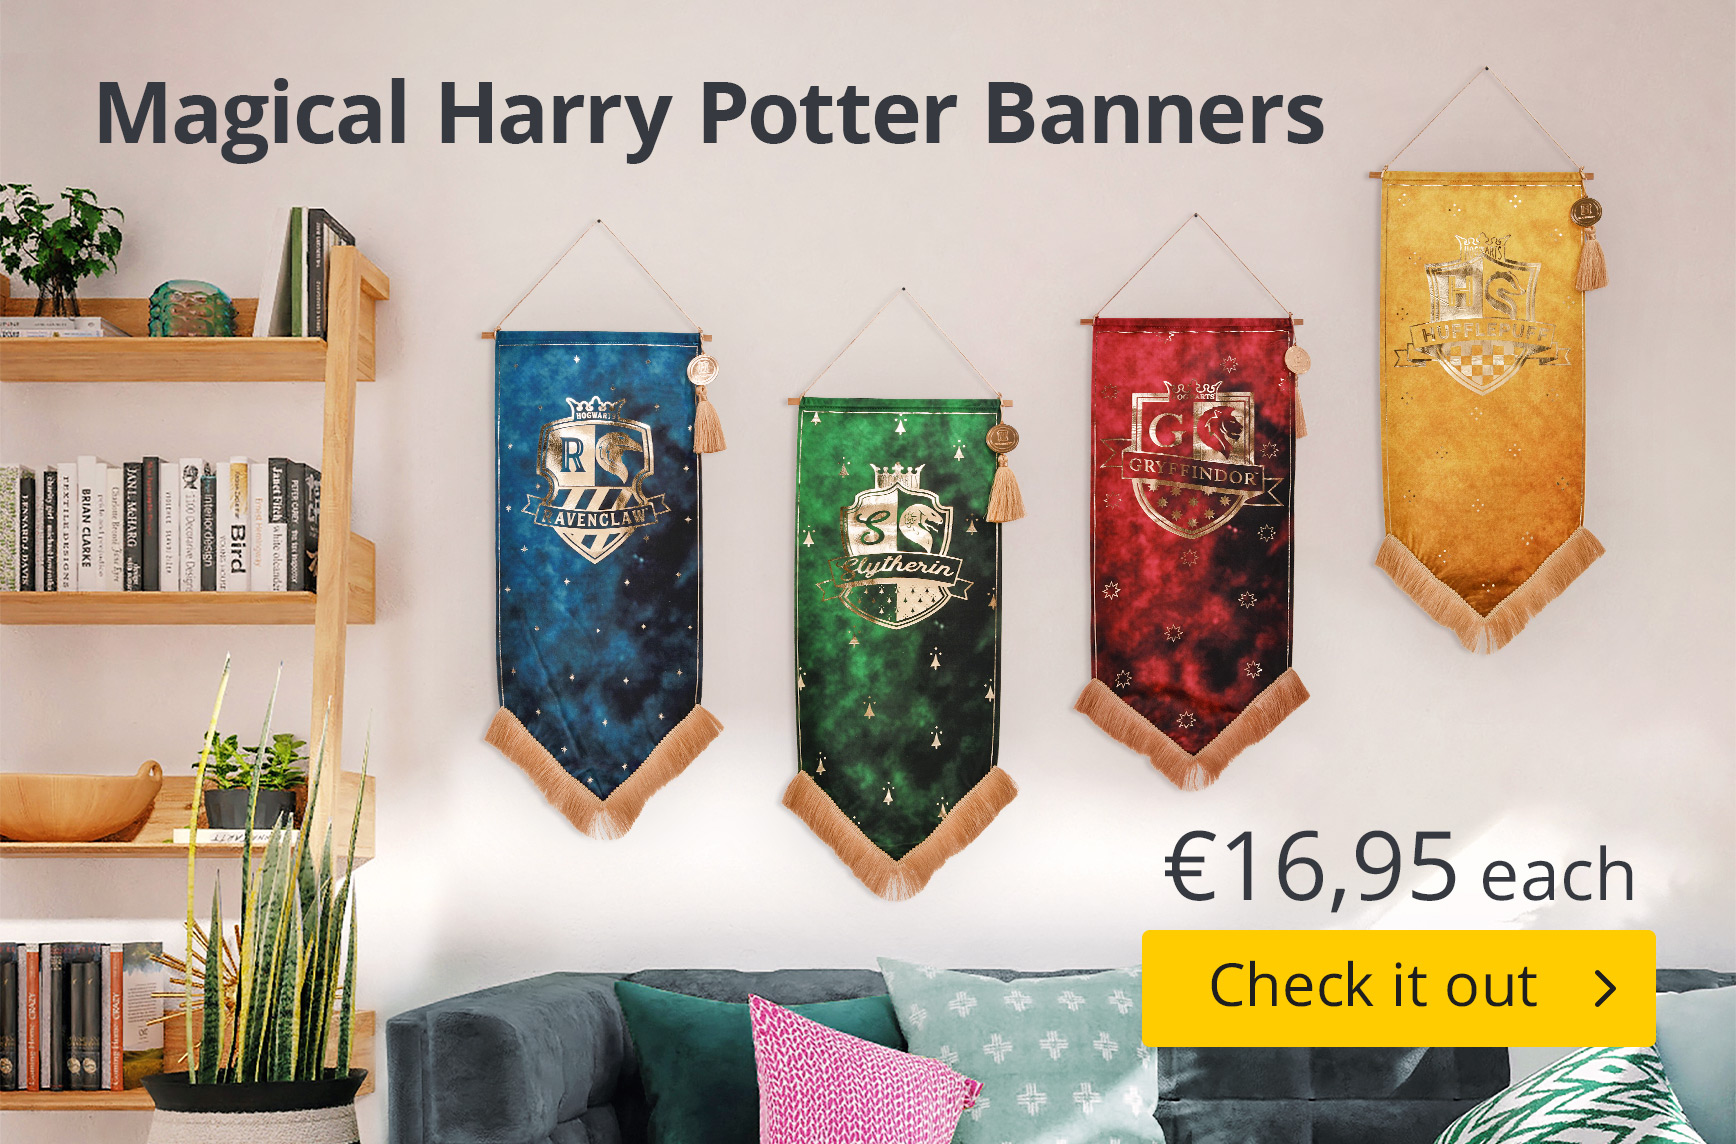 Magical Harry Potter Banners - €16,95 each